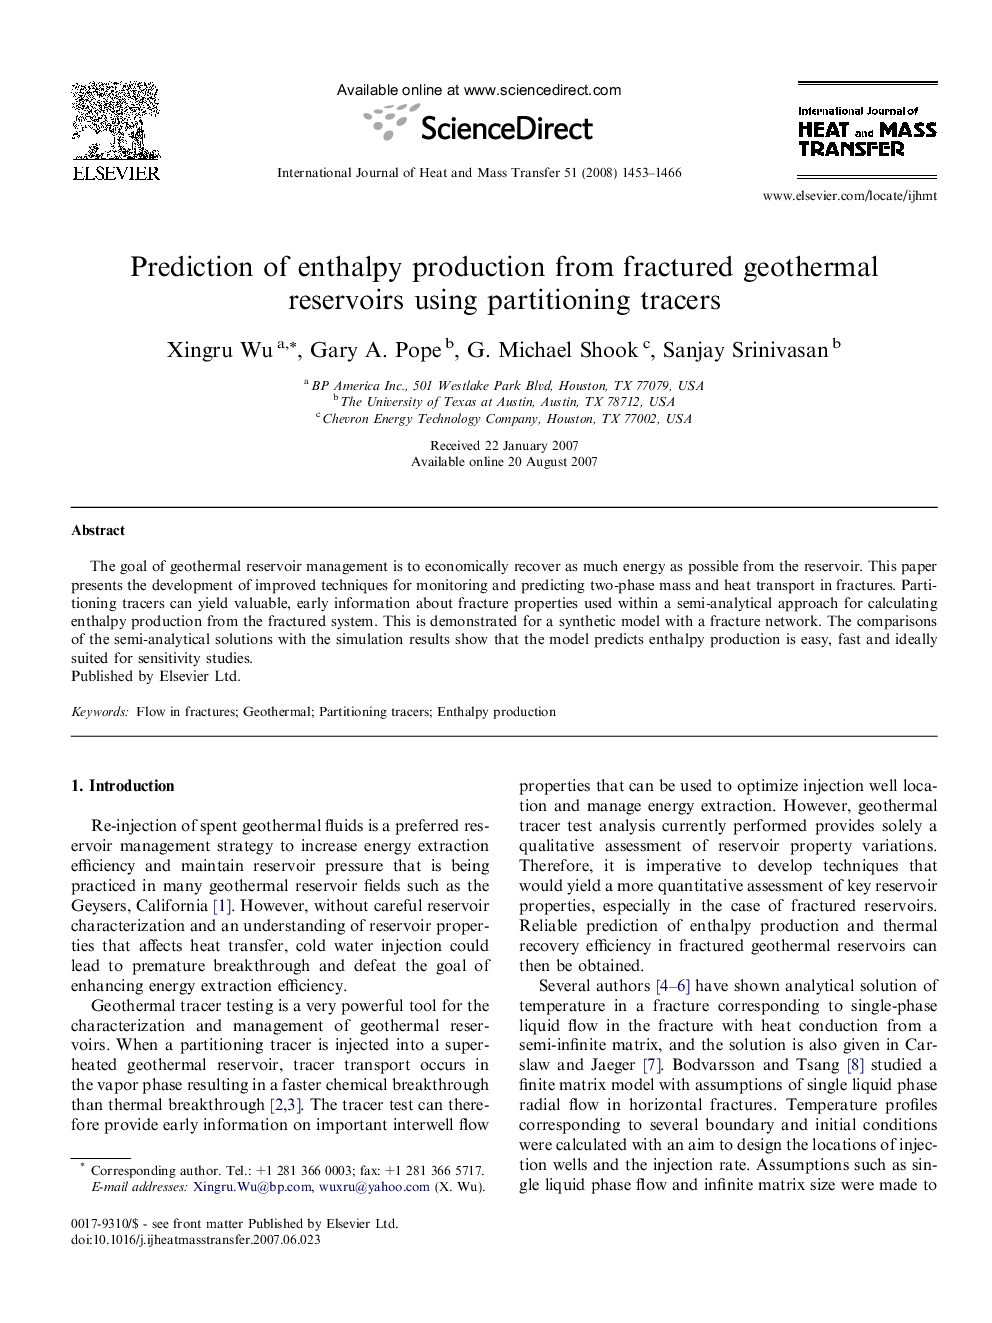 Prediction of enthalpy production from fractured geothermal reservoirs using partitioning tracers